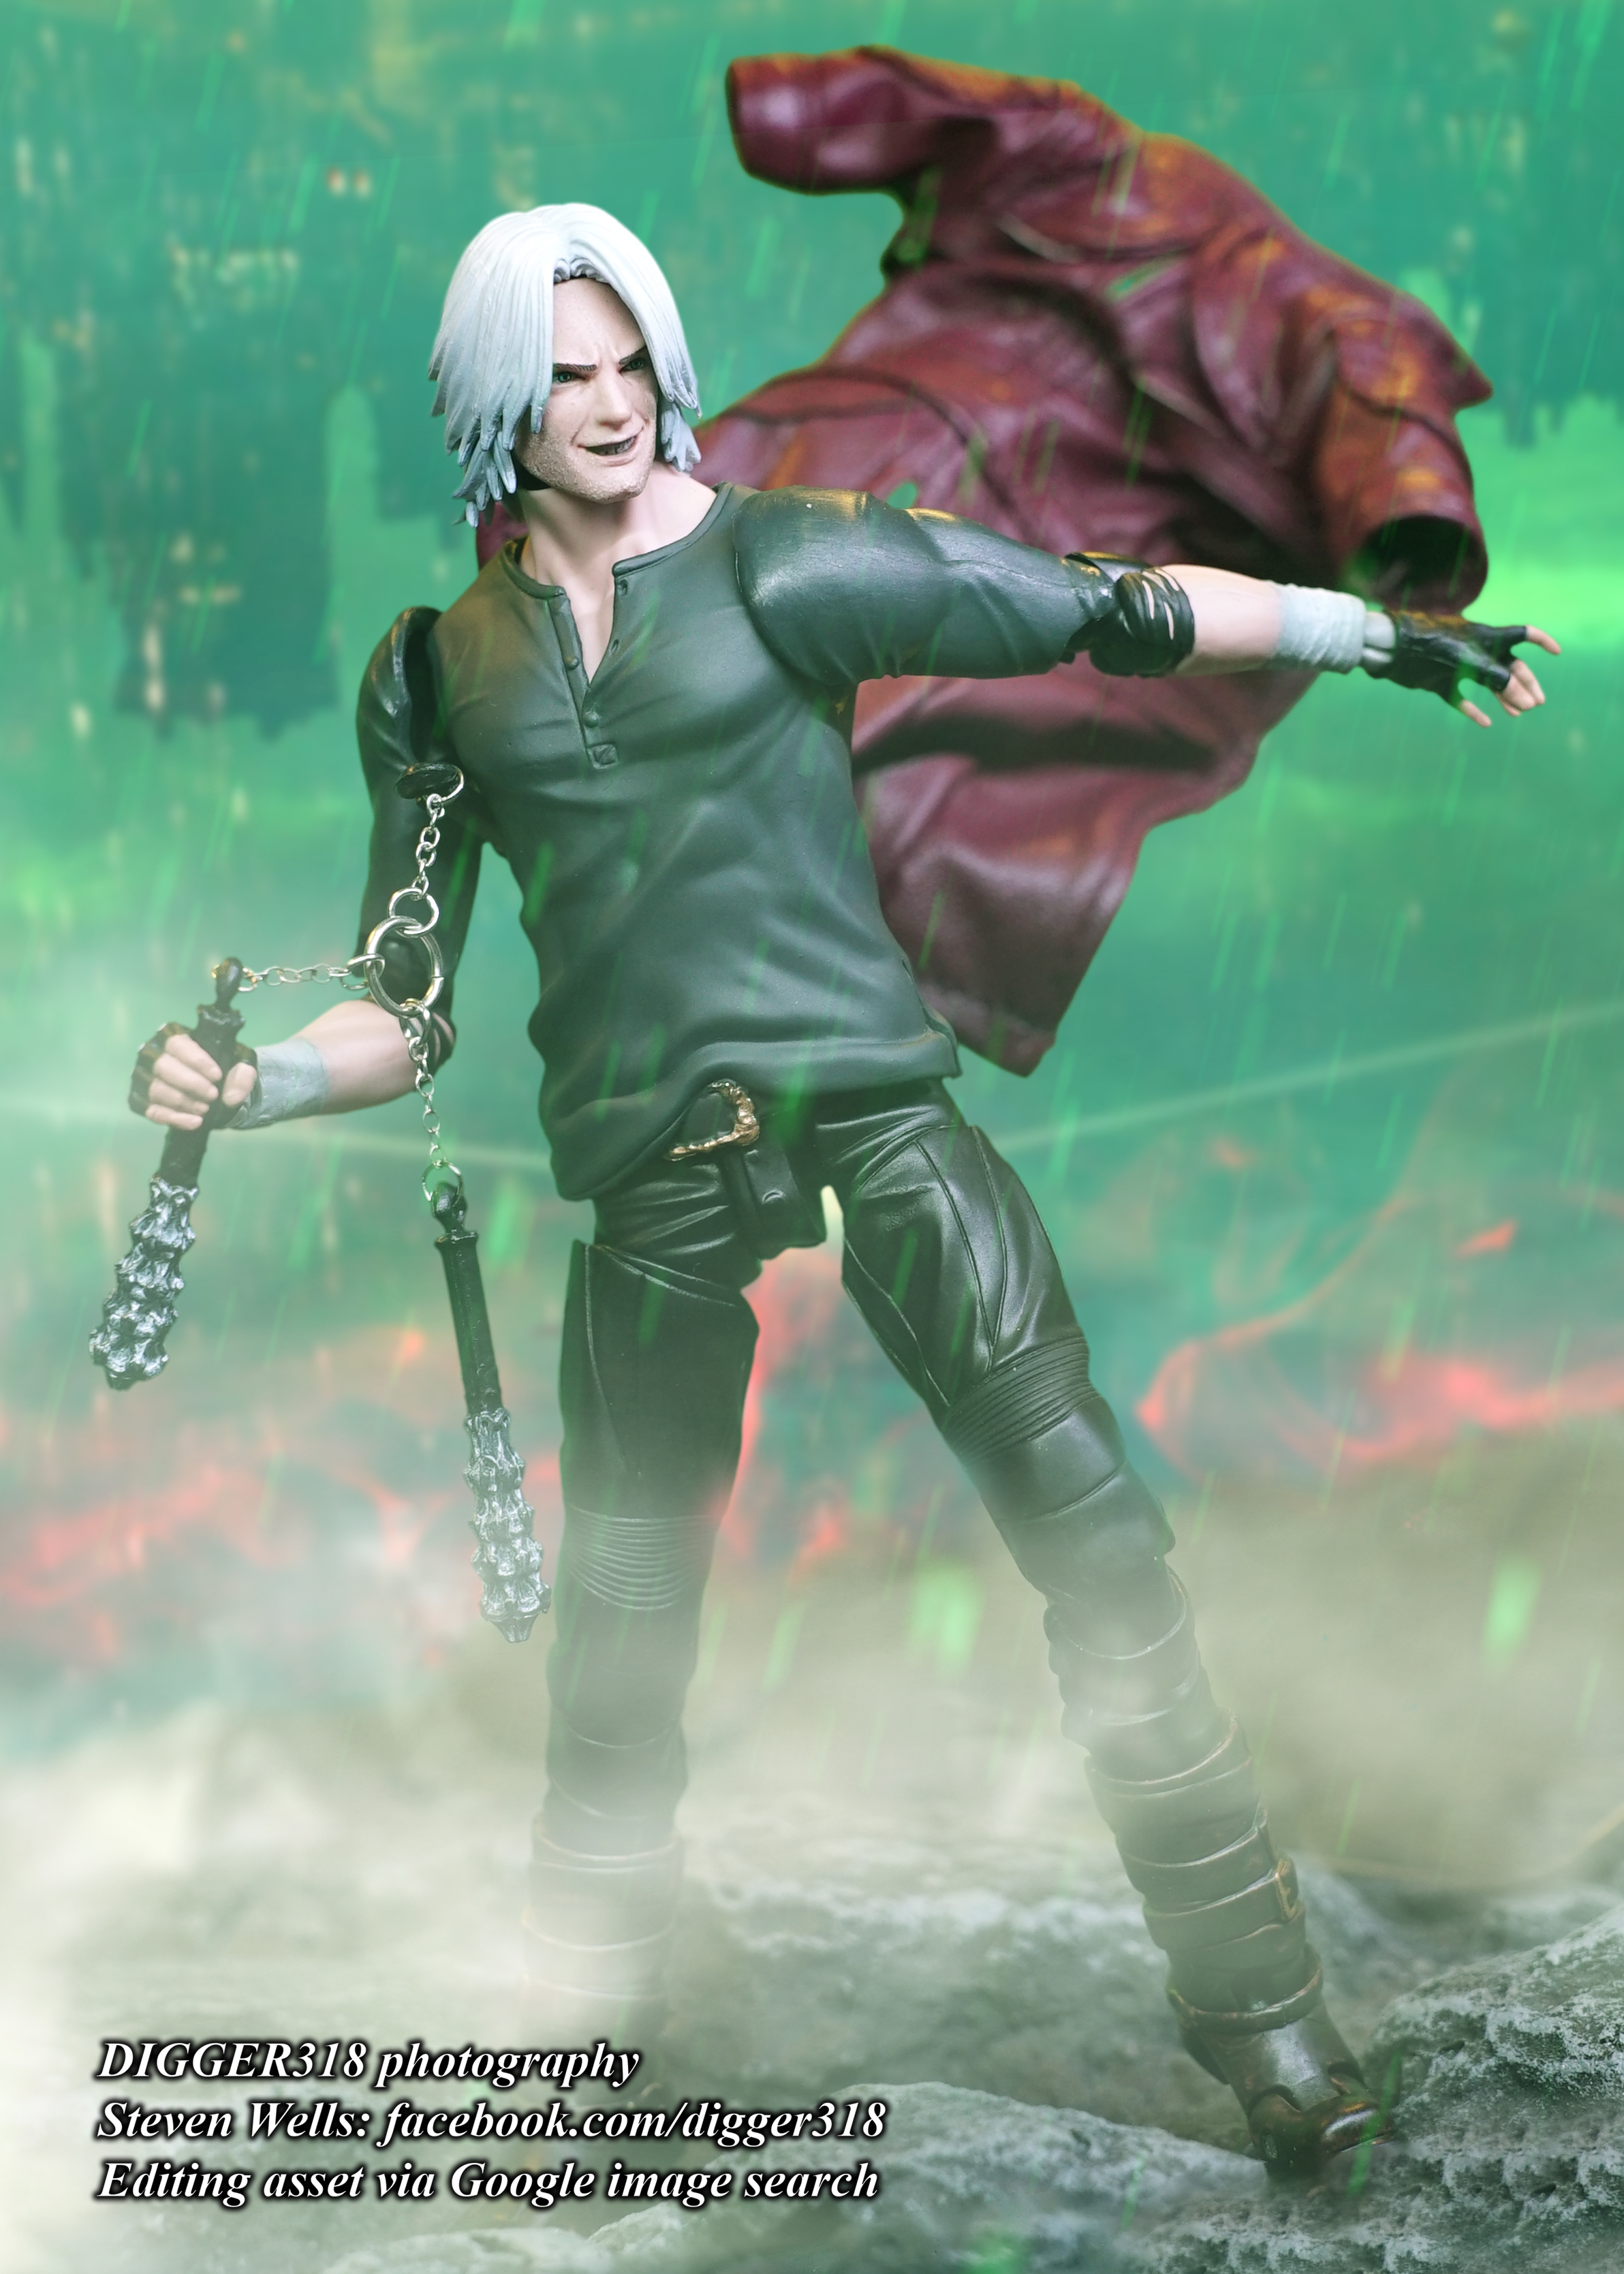 Devil May Cry 5 1/12 Dante Action Figure Deluxe Version